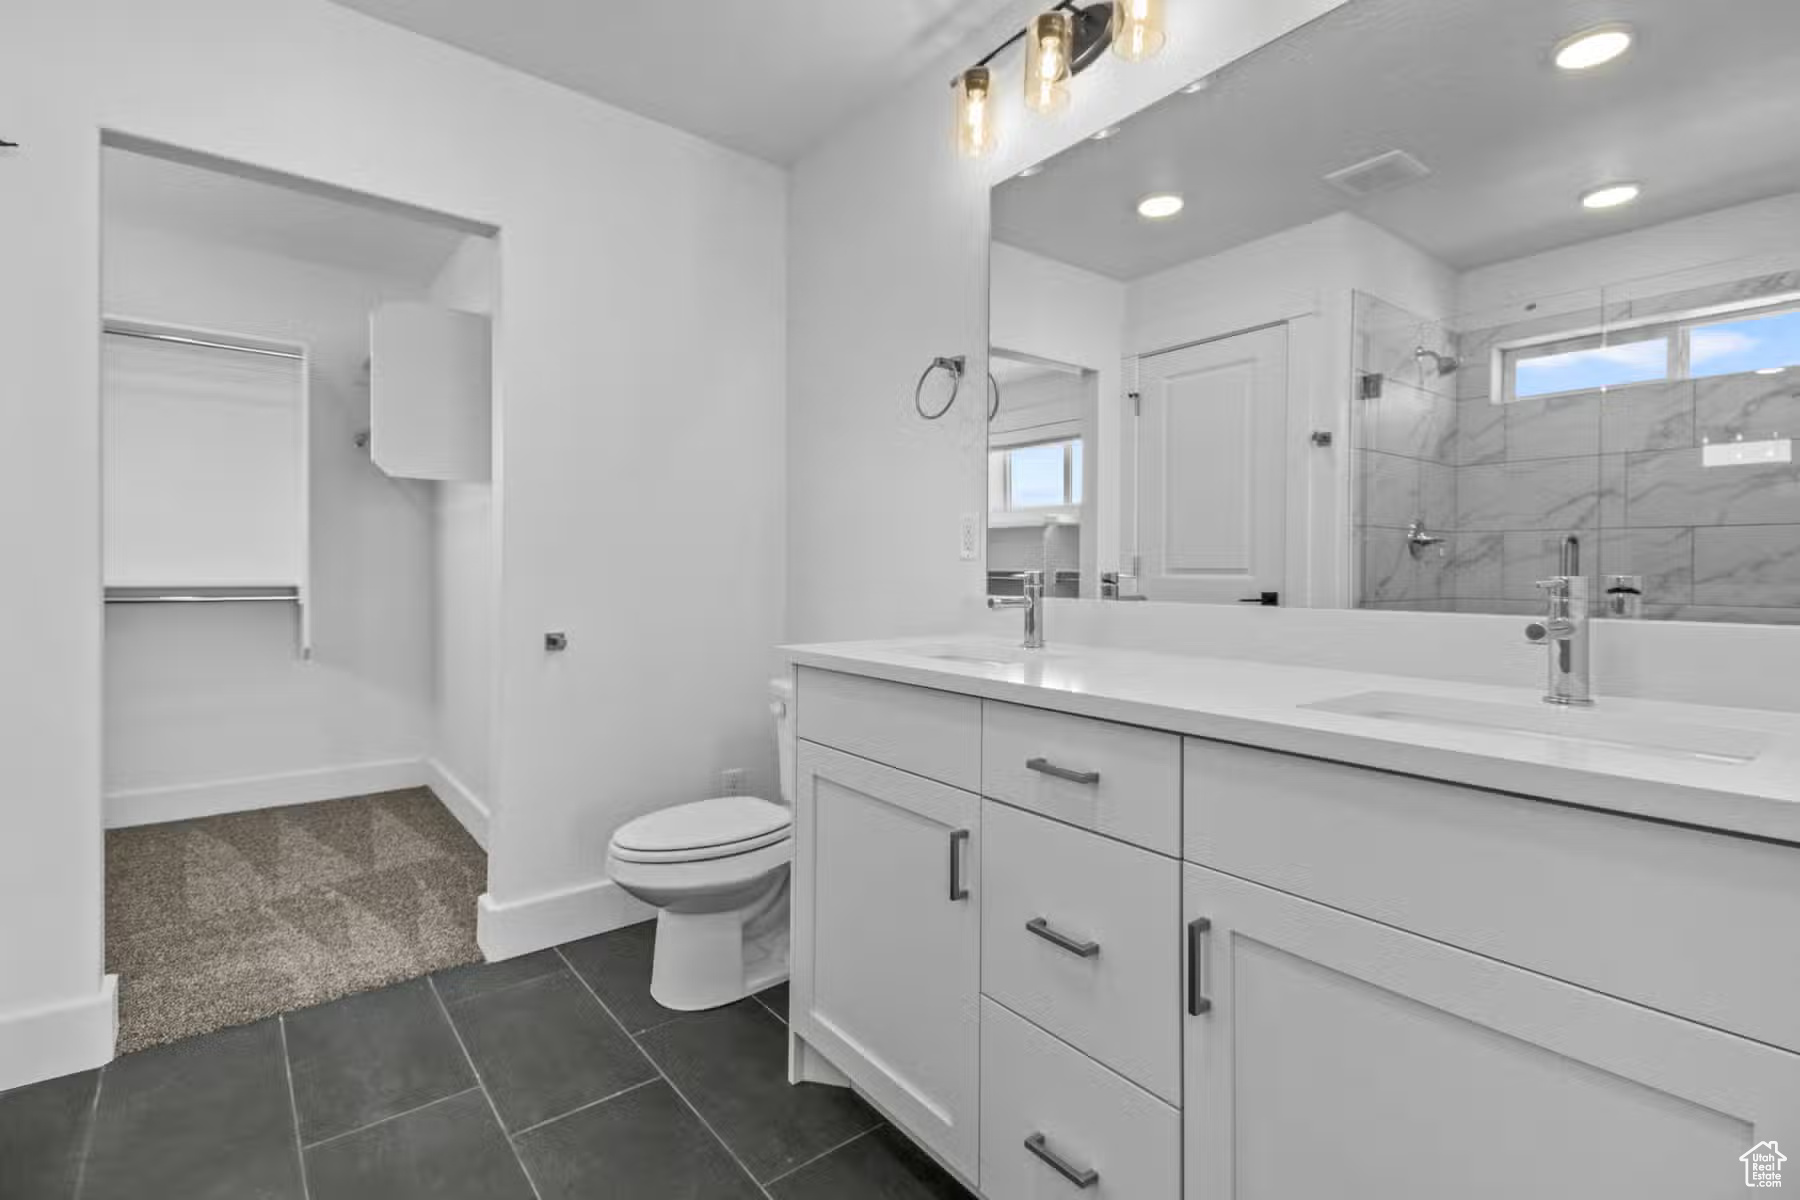 Bathroom with a wealth of natural light, double sink, tile flooring, oversized vanity, and toilet